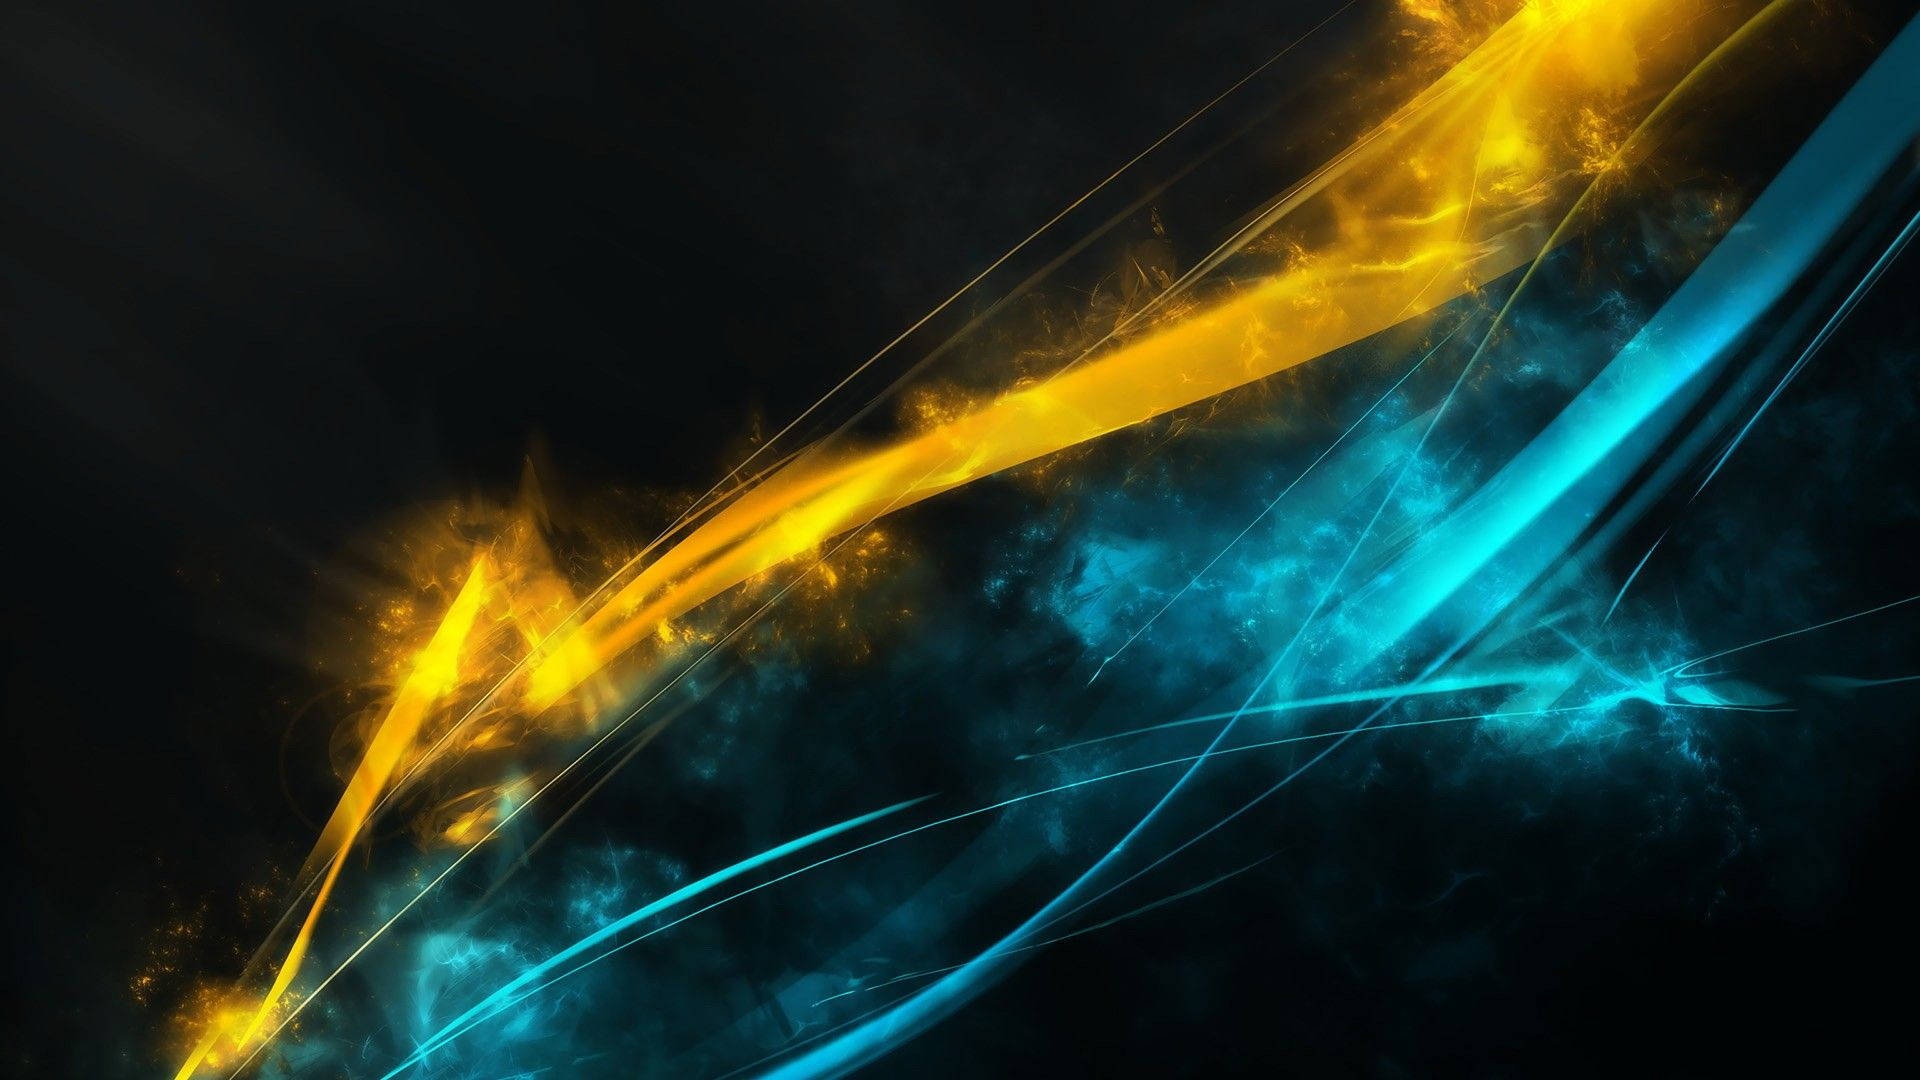 Free Abstract Wallpaper Downloads, [1500+] Abstract Wallpapers for FREE |  